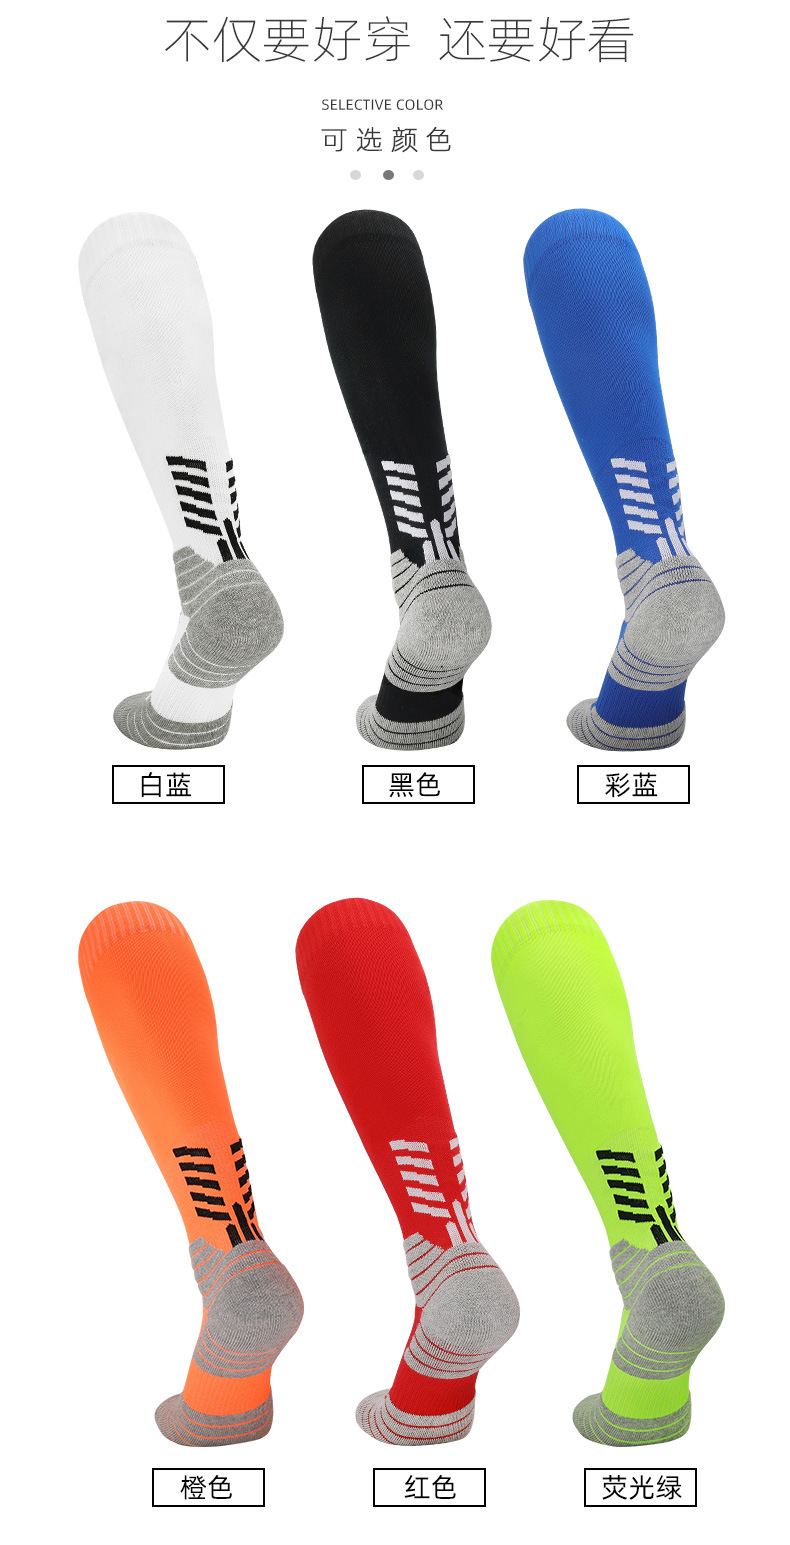 Unisex/Men and women can sport color matching high tube socks